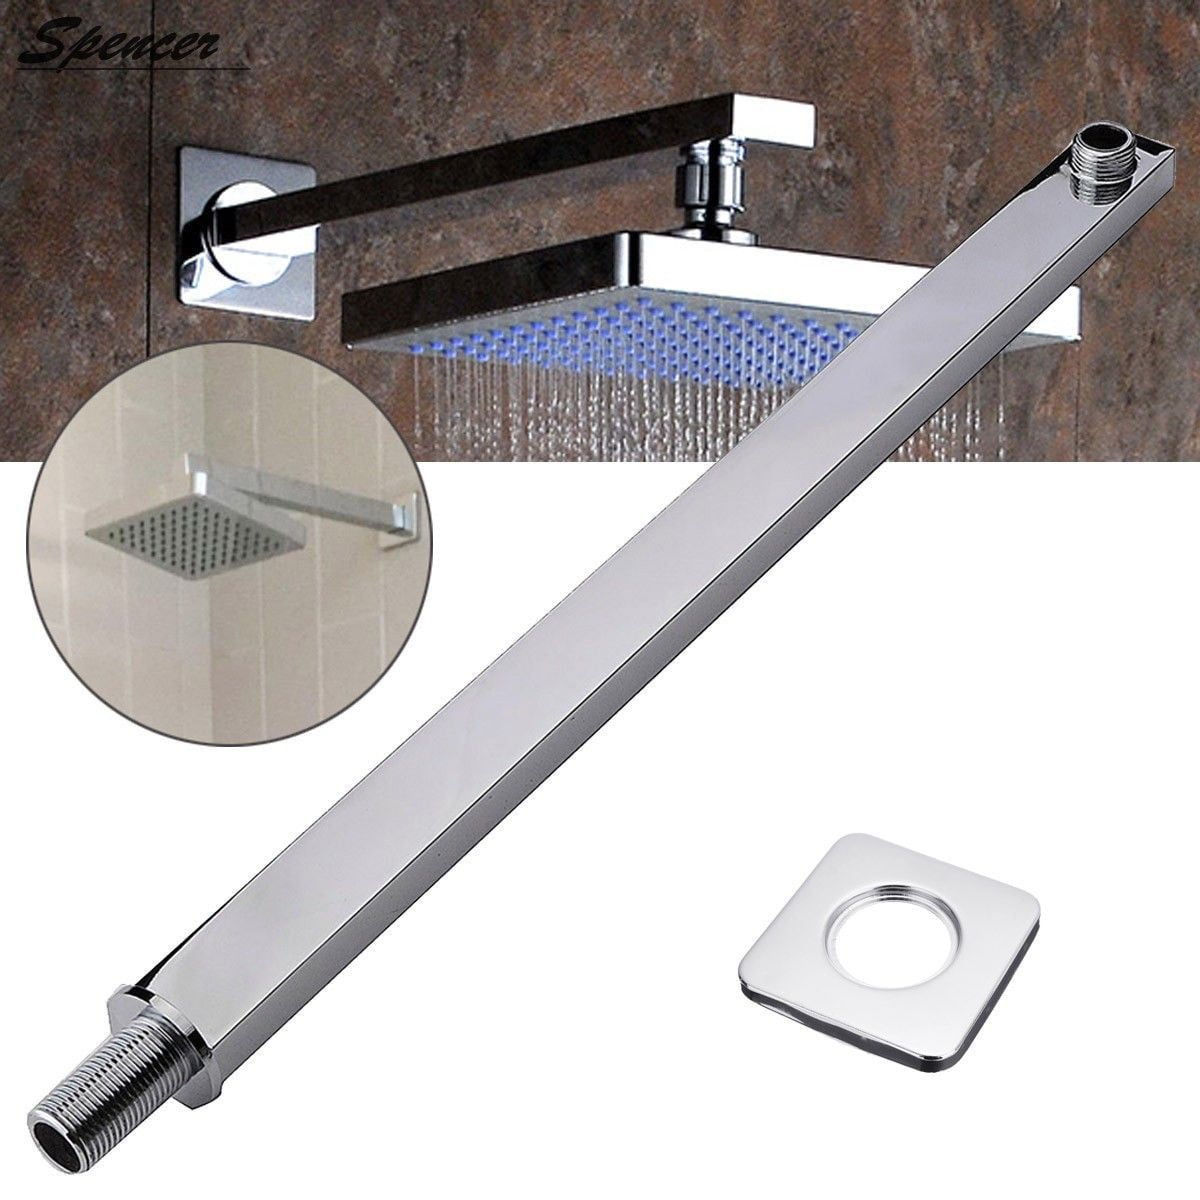 16" Stainless Steel Square Rainfall Shower Head Wall Mounted Extension Arm 40cm 